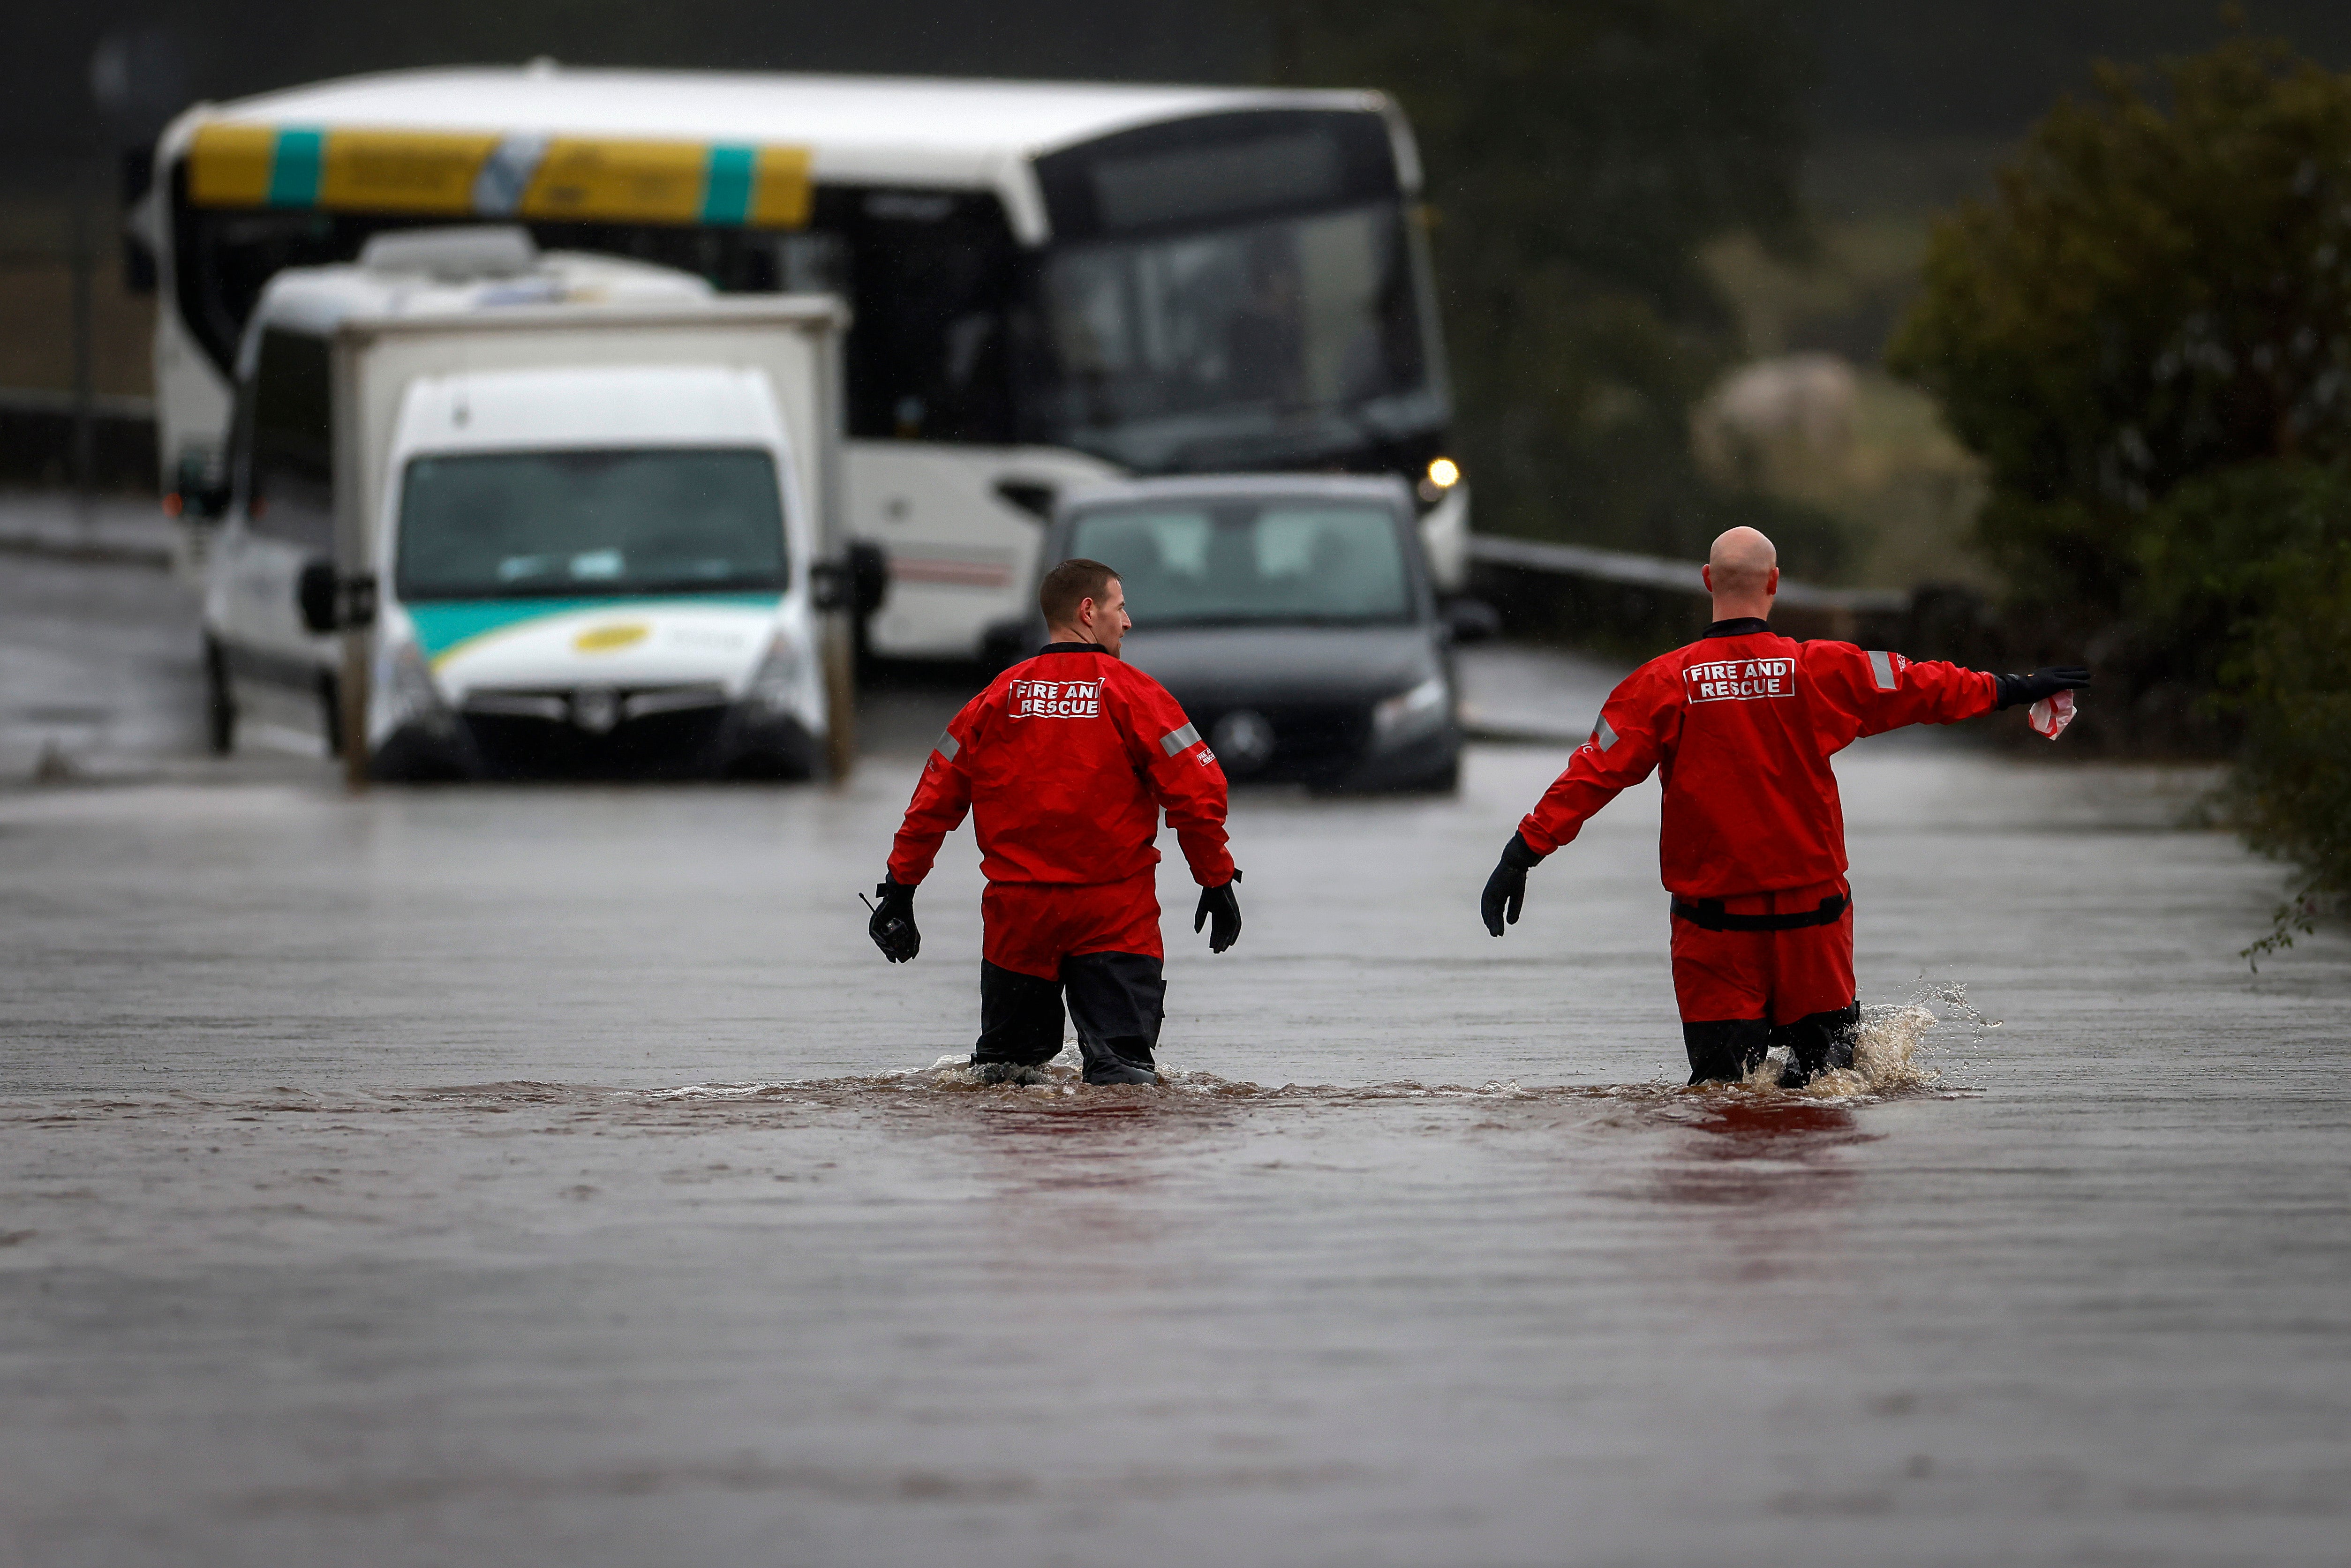 pMembers of the public struggle with flooding in Drymen, Scotland, after amber weather warnings were issued across much of the country. /p